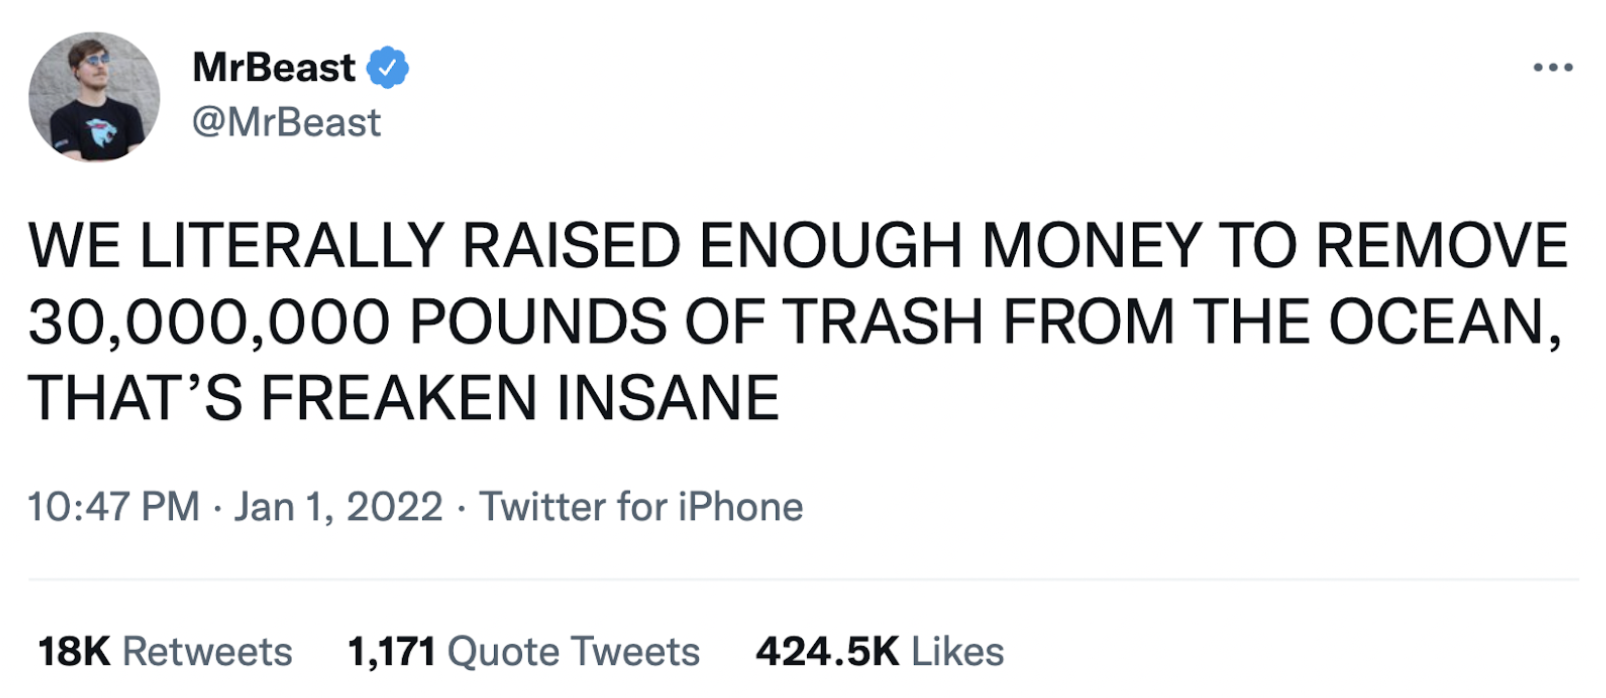 Imagine if Mr. Beast launched a social token that, through a cycle of earning and redeeming, created a sustainable micro-economy that provided consistent incentives for his fan base to earn tokens by cleaning up plastic at beaches worldwide.